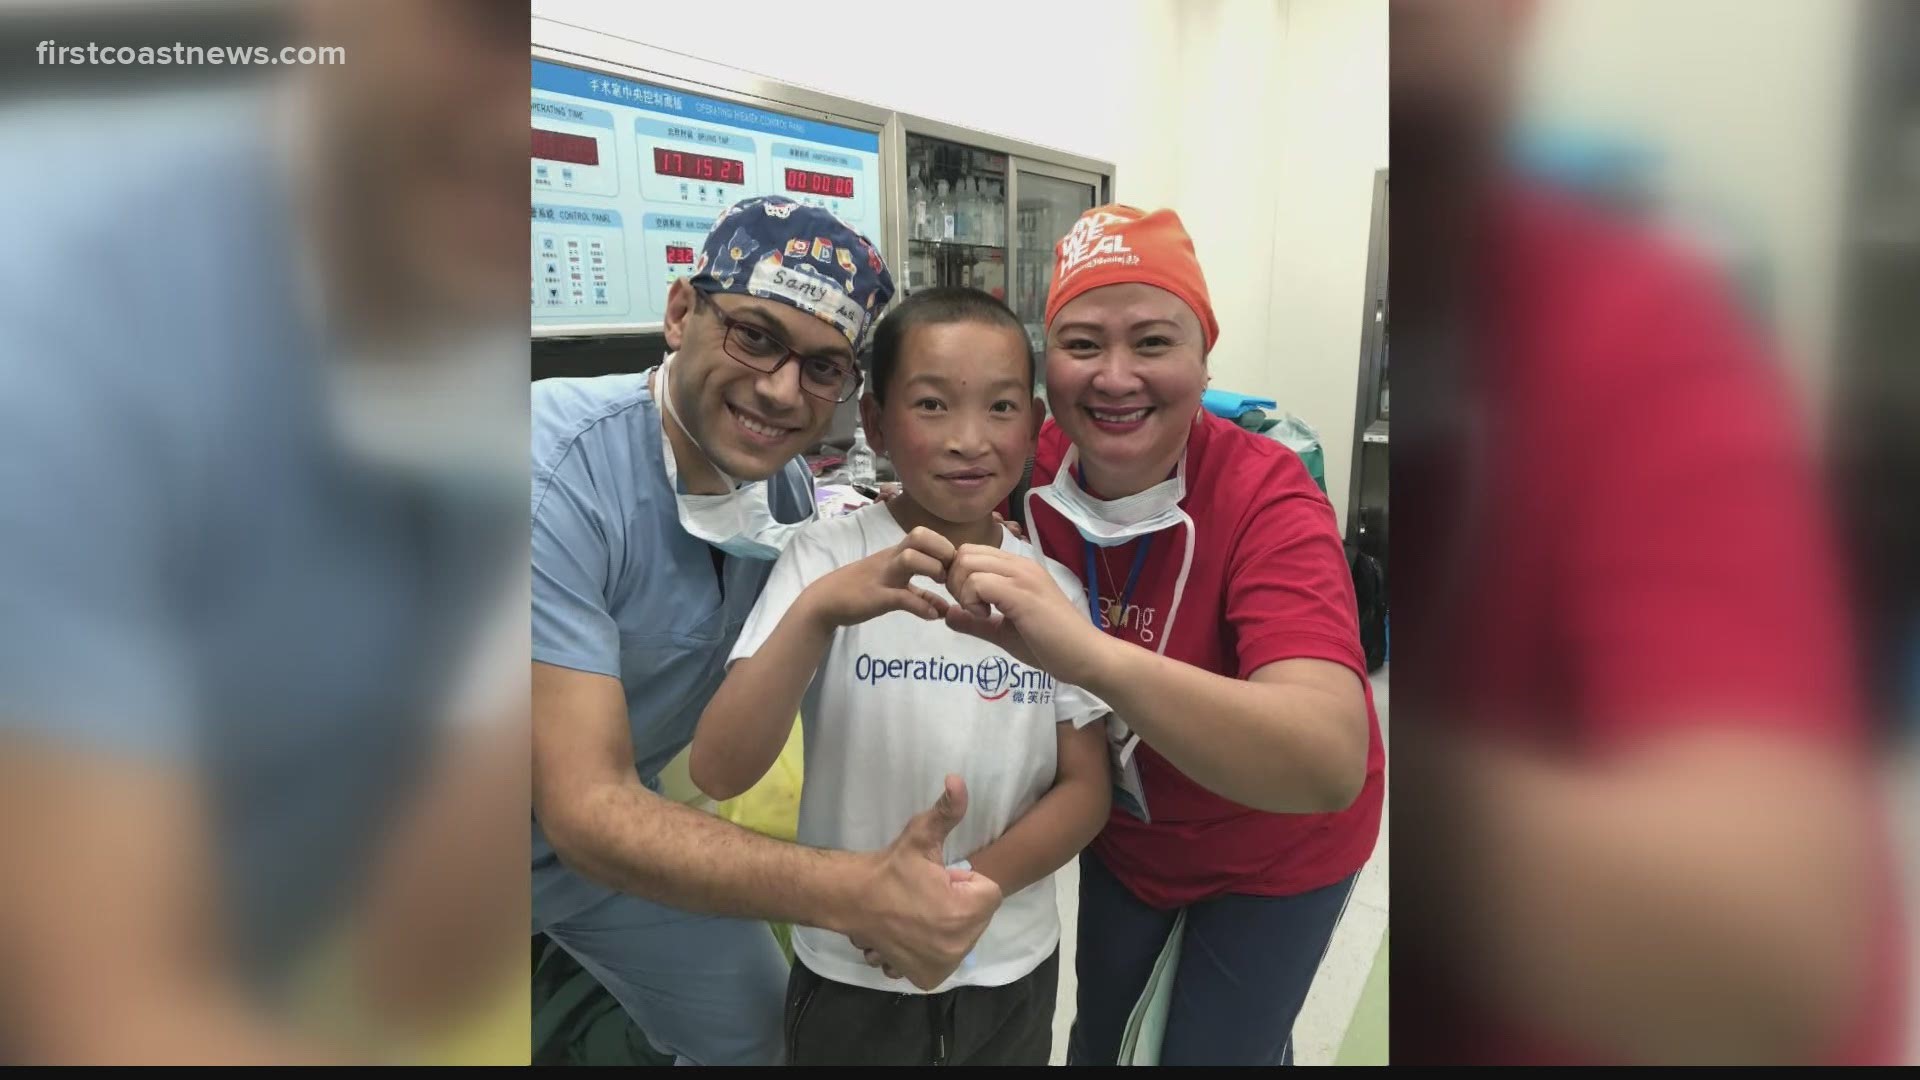 Jacksonville couple helps 25 volunteer Operation Smile missions on World Kindness Day